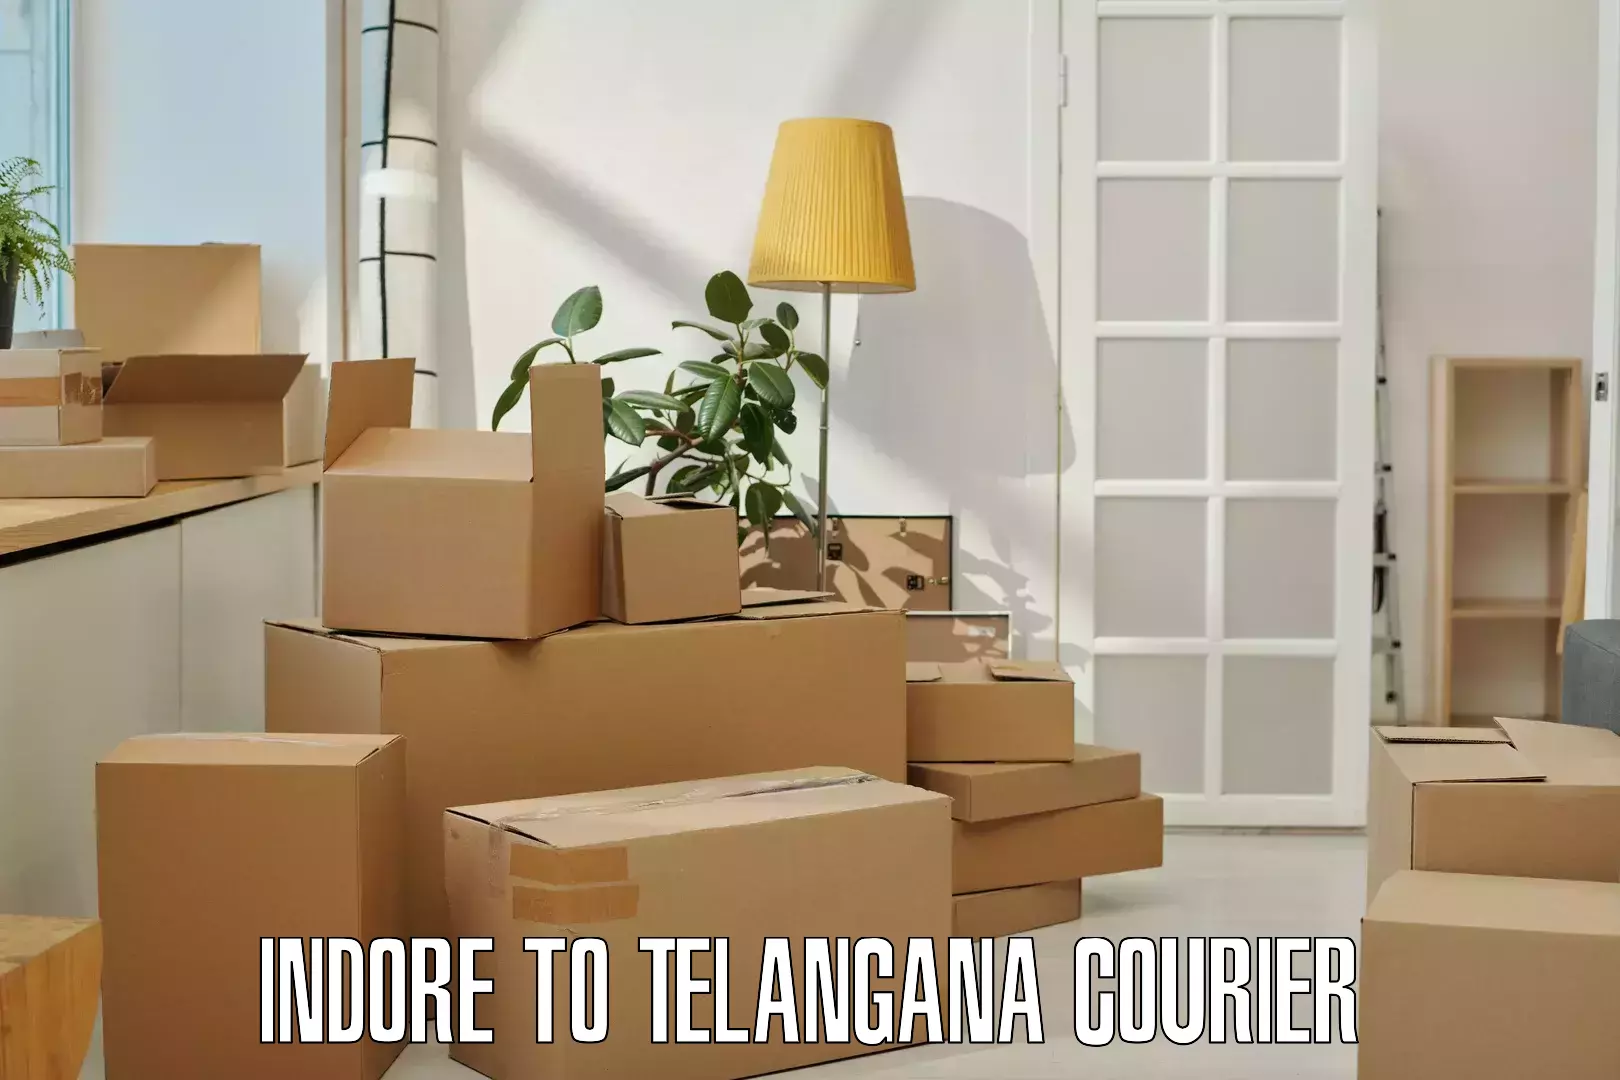 24/7 courier service Indore to Bhongir